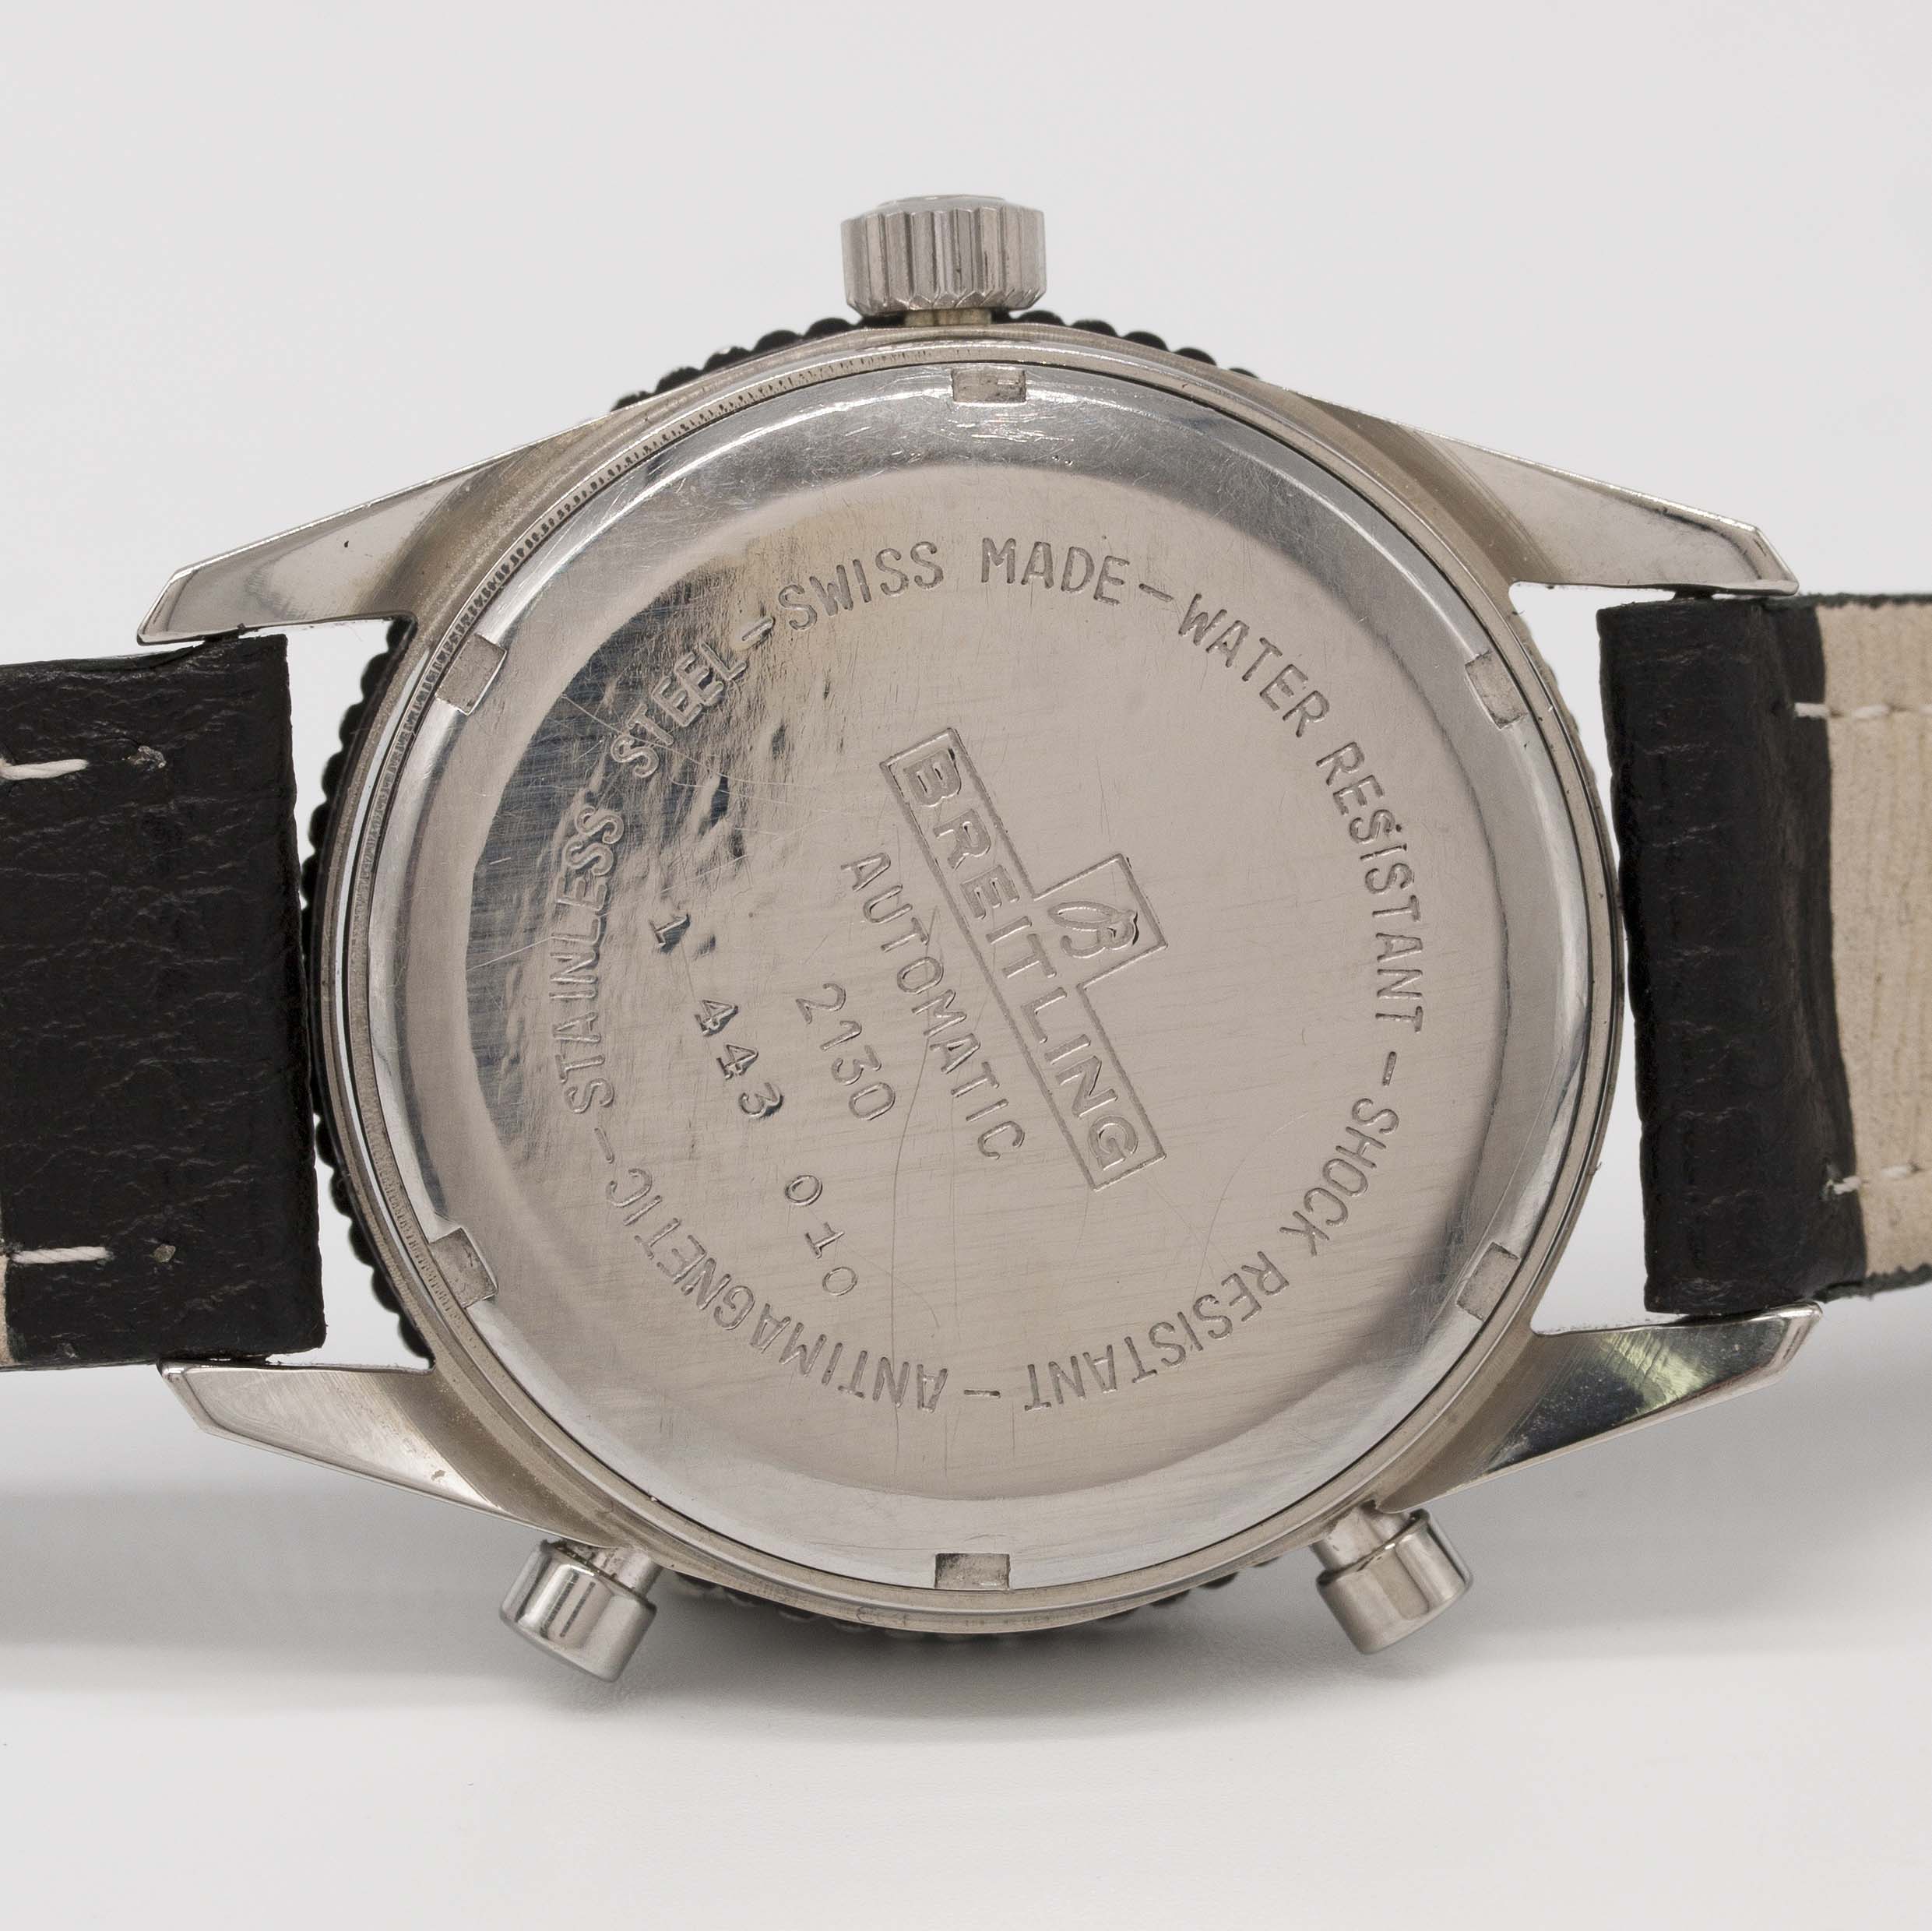 A RARE GENTLEMAN'S STAINLESS STEEL BREITLING CHRONO-MATIC CHRONOGRAPH WRIST WATCH CIRCA 1977, REF. - Image 8 of 12